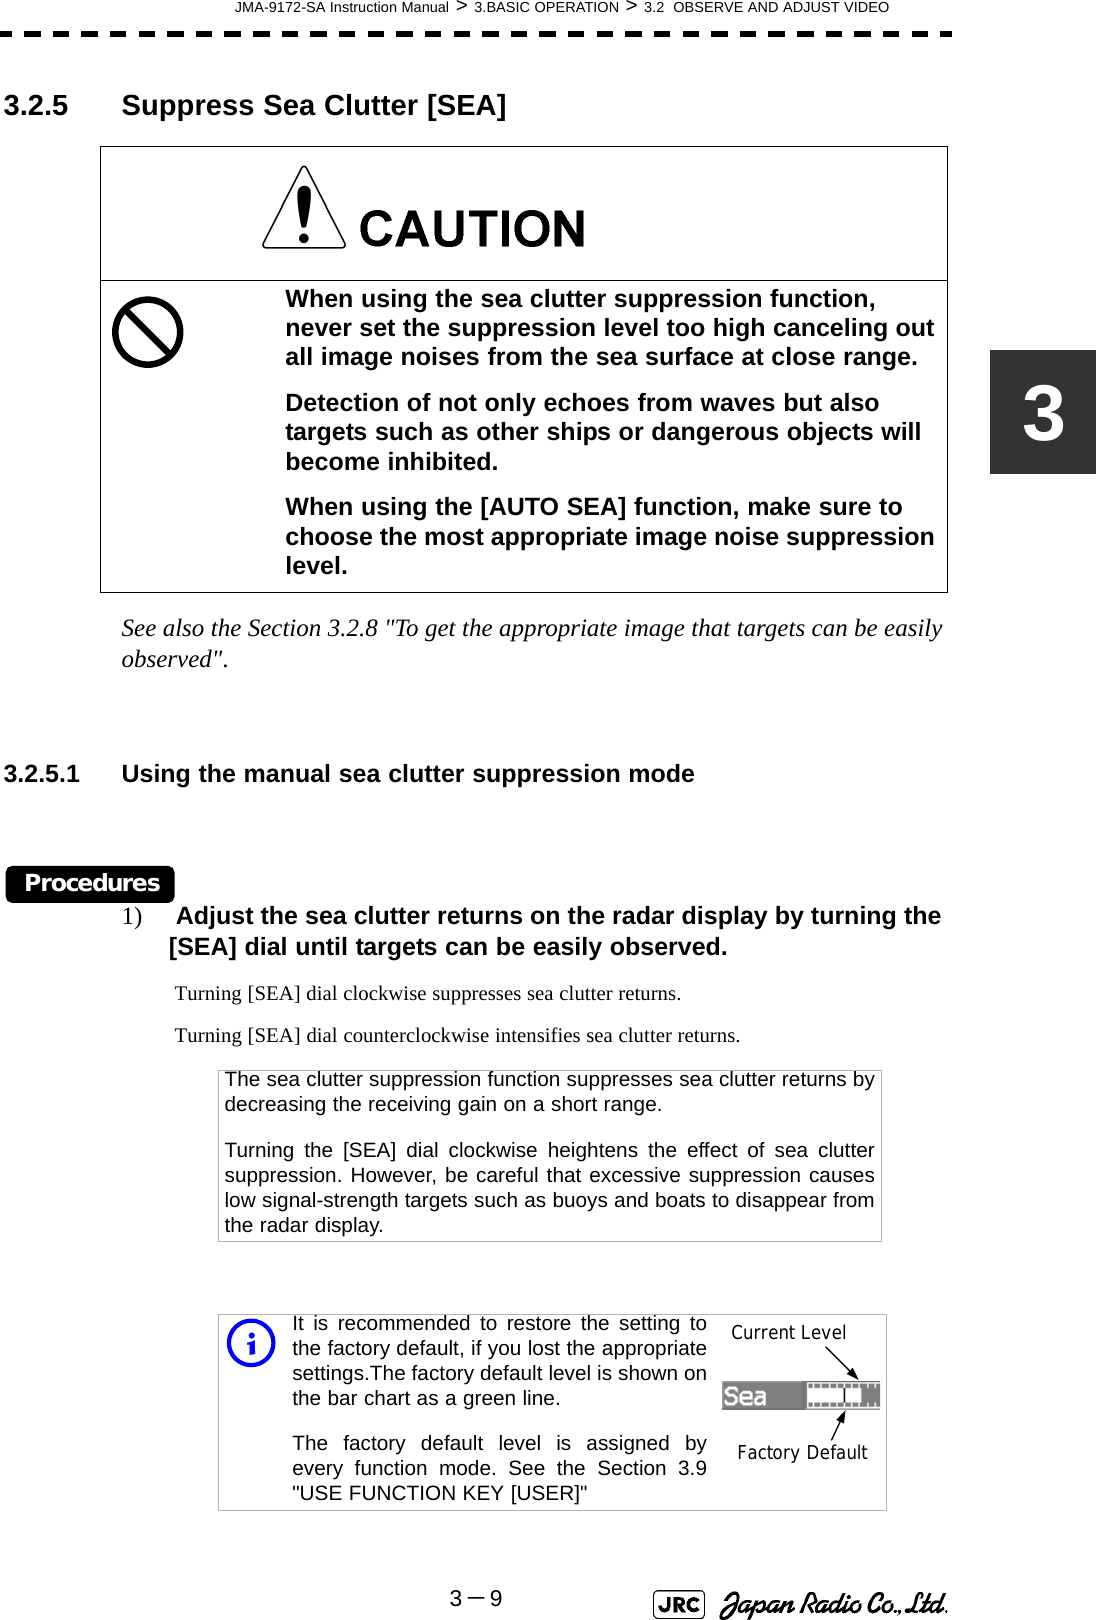 JMA-9172-SA Instruction Manual &gt; 3.BASIC OPERATION &gt; 3.2  OBSERVE AND ADJUST VIDEO3－933.2.5 Suppress Sea Clutter [SEA] See also the Section 3.2.8 &quot;To get the appropriate image that targets can be easily observed&quot;.3.2.5.1 Using the manual sea clutter suppression modeProcedures1)  Adjust the sea clutter returns on the radar display by turning the [SEA] dial until targets can be easily observed. Turning [SEA] dial clockwise suppresses sea clutter returns. Turning [SEA] dial counterclockwise intensifies sea clutter returns. When using the sea clutter suppression function, never set the suppression level too high canceling out all image noises from the sea surface at close range.Detection of not only echoes from waves but also targets such as other ships or dangerous objects will become inhibited.When using the [AUTO SEA] function, make sure to choose the most appropriate image noise suppression level.The sea clutter suppression function suppresses sea clutter returns bydecreasing the receiving gain on a short range.Turning the [SEA] dial clockwise heightens the effect of sea cluttersuppression. However, be careful that excessive suppression causeslow signal-strength targets such as buoys and boats to disappear fromthe radar display.iIt is recommended to restore the setting tothe factory default, if you lost the appropriatesettings.The factory default level is shown onthe bar chart as a green line. The factory default level is assigned byevery function mode. See the Section 3.9&quot;USE FUNCTION KEY [USER]&quot;Current LevelFactory Default